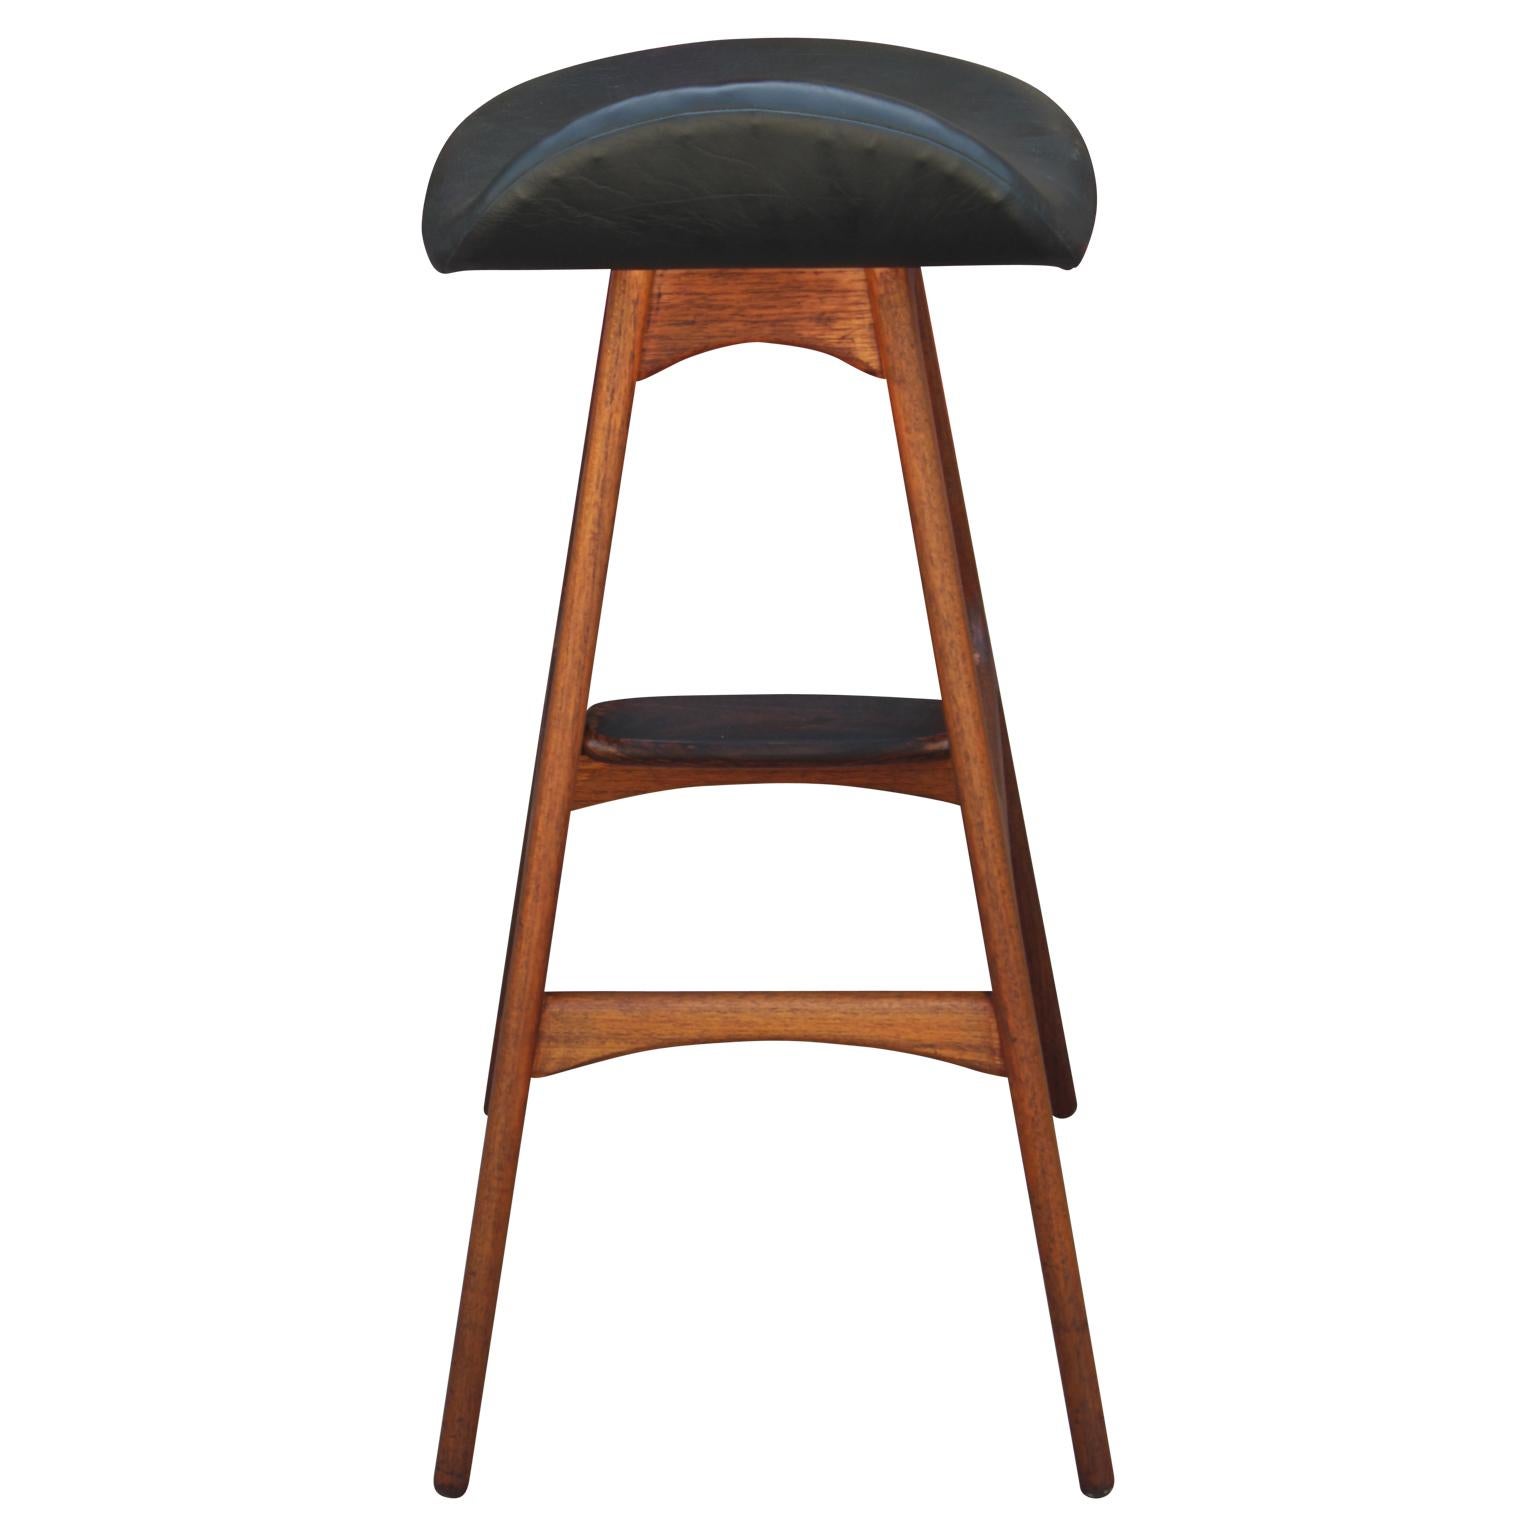 Mid-20th Century Modern Teak and Rosewood Bar Stool by Erik Buck for Odense Møbler OD61